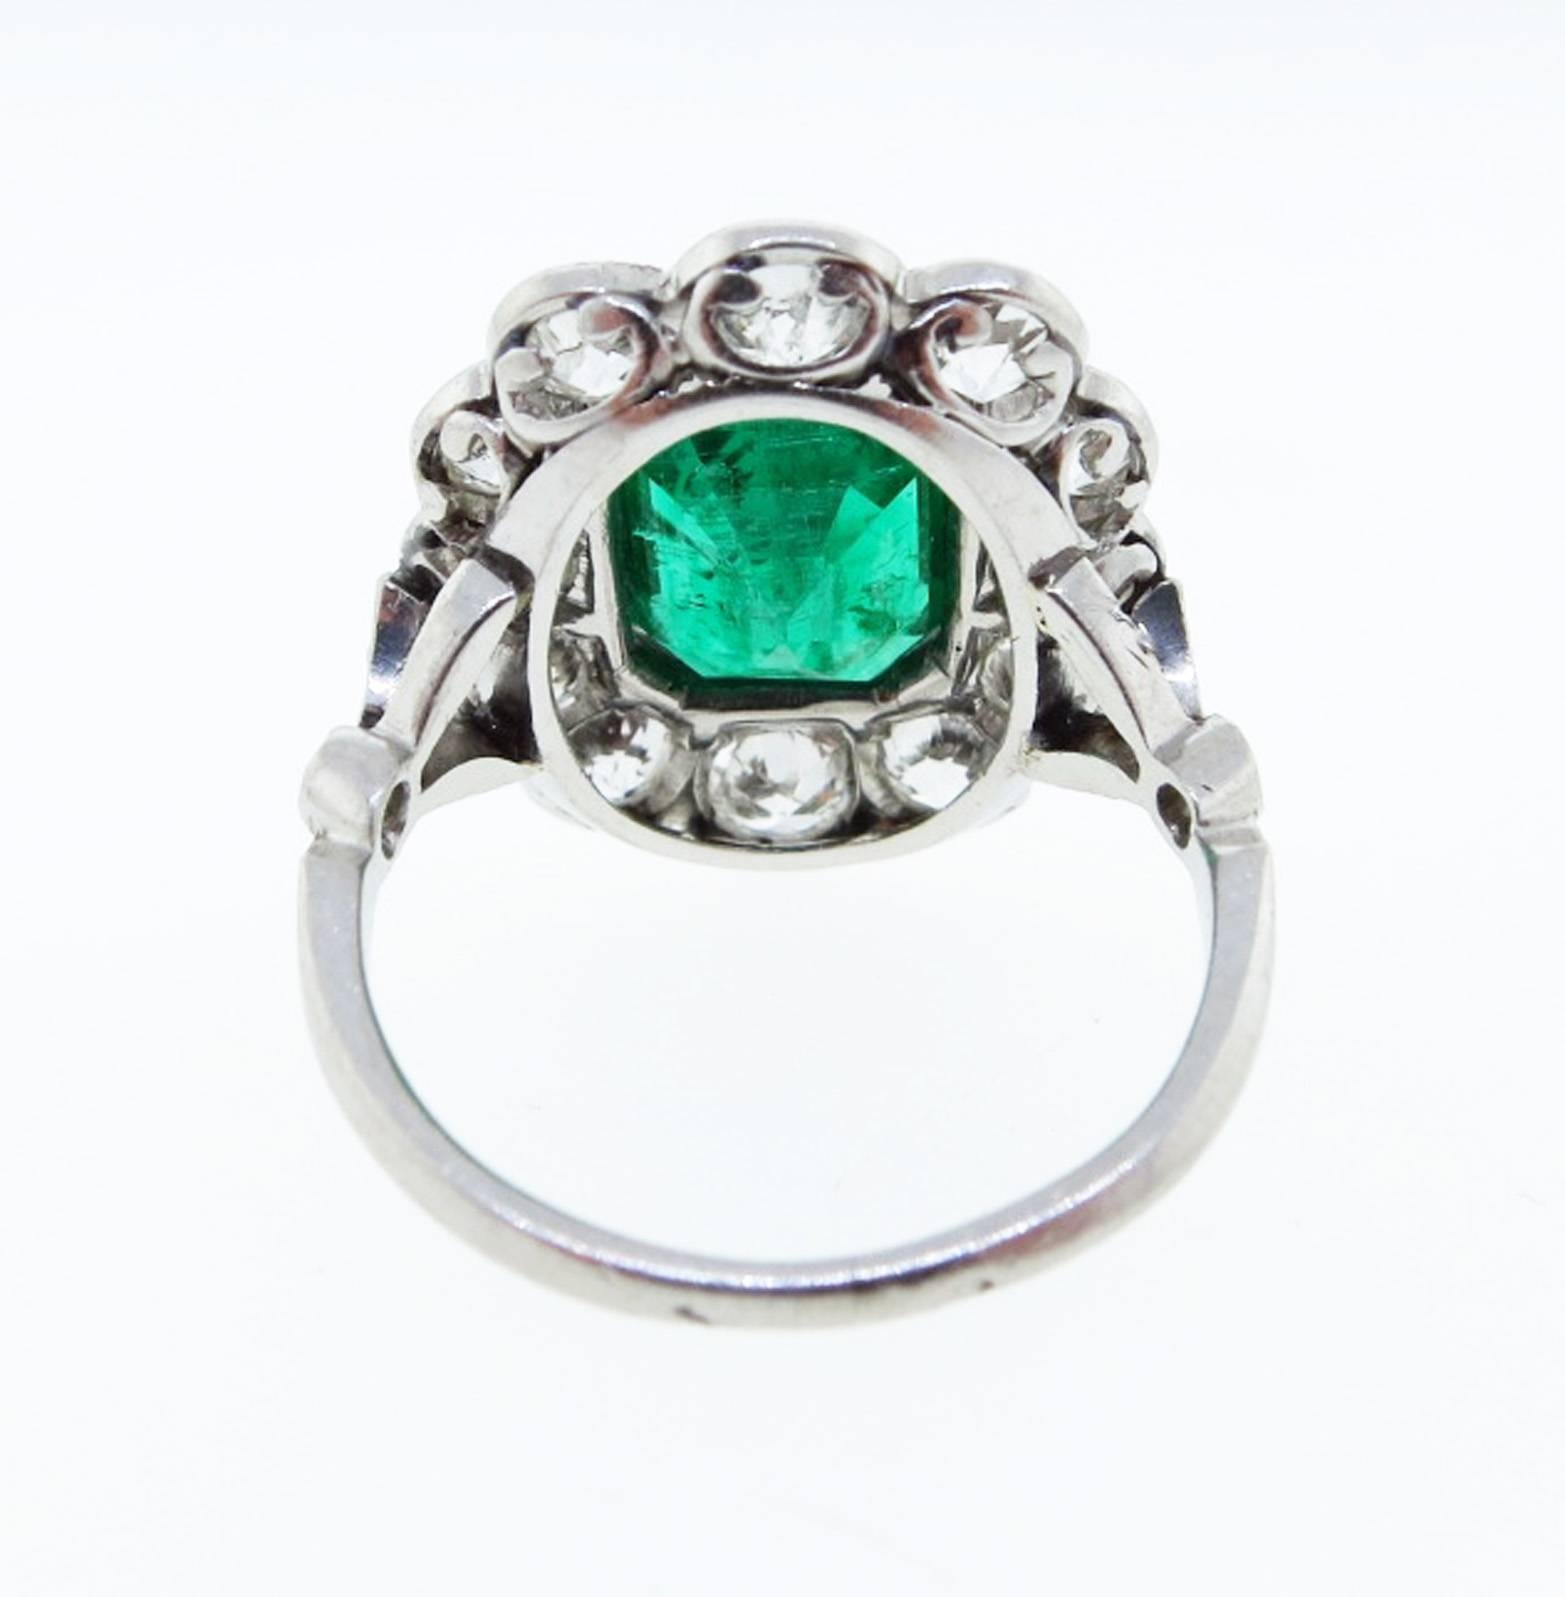 Edwardian Emerald Diamond Platinum Ring In Excellent Condition For Sale In Lambertville, NJ